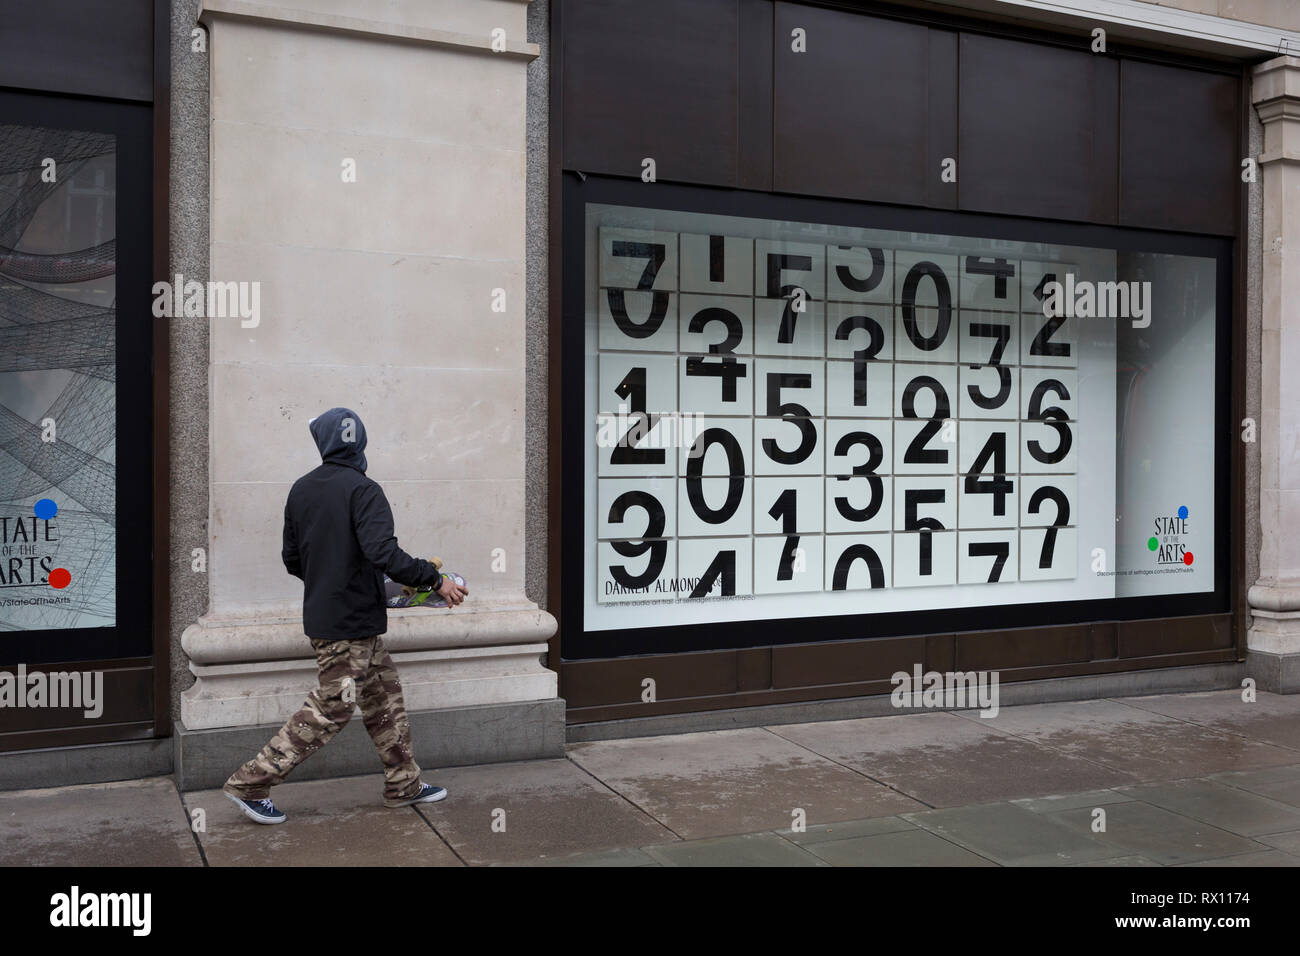 A skateboarder walks past a window display that features numbers - part of a design theme called 'State of the Arts', at the Selfridges department store on Oxford Street, on 4th March 2019, in London England. Darren Almond's piece ‘Chance Encounter 004’, consists of a grid formed from rectangular panels, featuring fragmented numbers that appear to scroll across the surface. State of the Arts is a gallery of works by nine crtically-acclaimed artists in Selfridges windows to celebrate the power of public art. Stock Photo